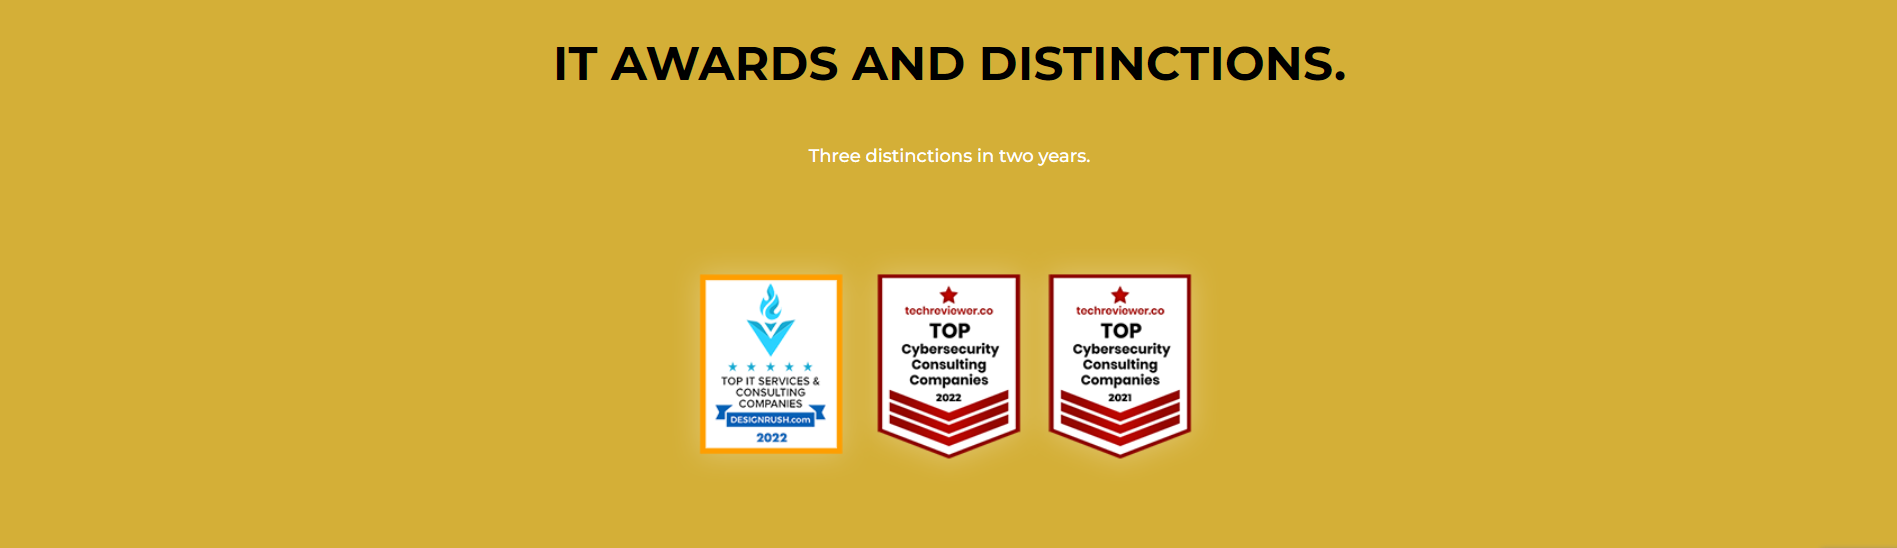 TWC awards and distinctions 